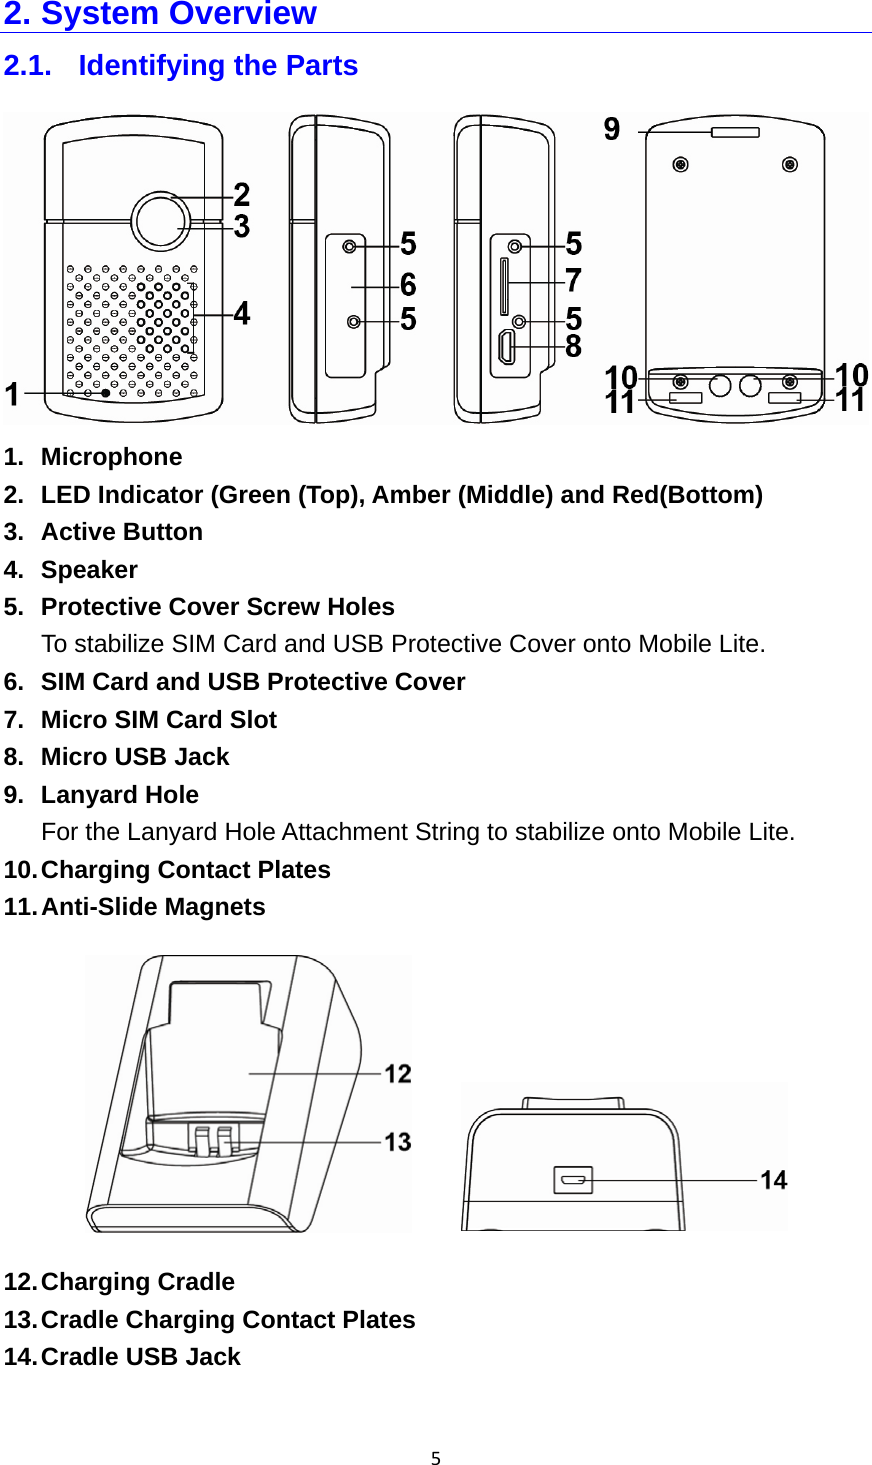 52. System Overview 2.1.  Identifying the Parts  1. Microphone 2.  LED Indicator (Green (Top), Amber (Middle) and Red(Bottom) 3. Active Button 4. Speaker 5.  Protective Cover Screw Holes To stabilize SIM Card and USB Protective Cover onto Mobile Lite. 6.  SIM Card and USB Protective Cover 7.  Micro SIM Card Slot 8.  Micro USB Jack 9. Lanyard Hole For the Lanyard Hole Attachment String to stabilize onto Mobile Lite. 10. Charging Contact Plates 11. Anti-Slide Magnets       12. Charging  Cradle 13. Cradle Charging Contact Plates 14. Cradle USB Jack  